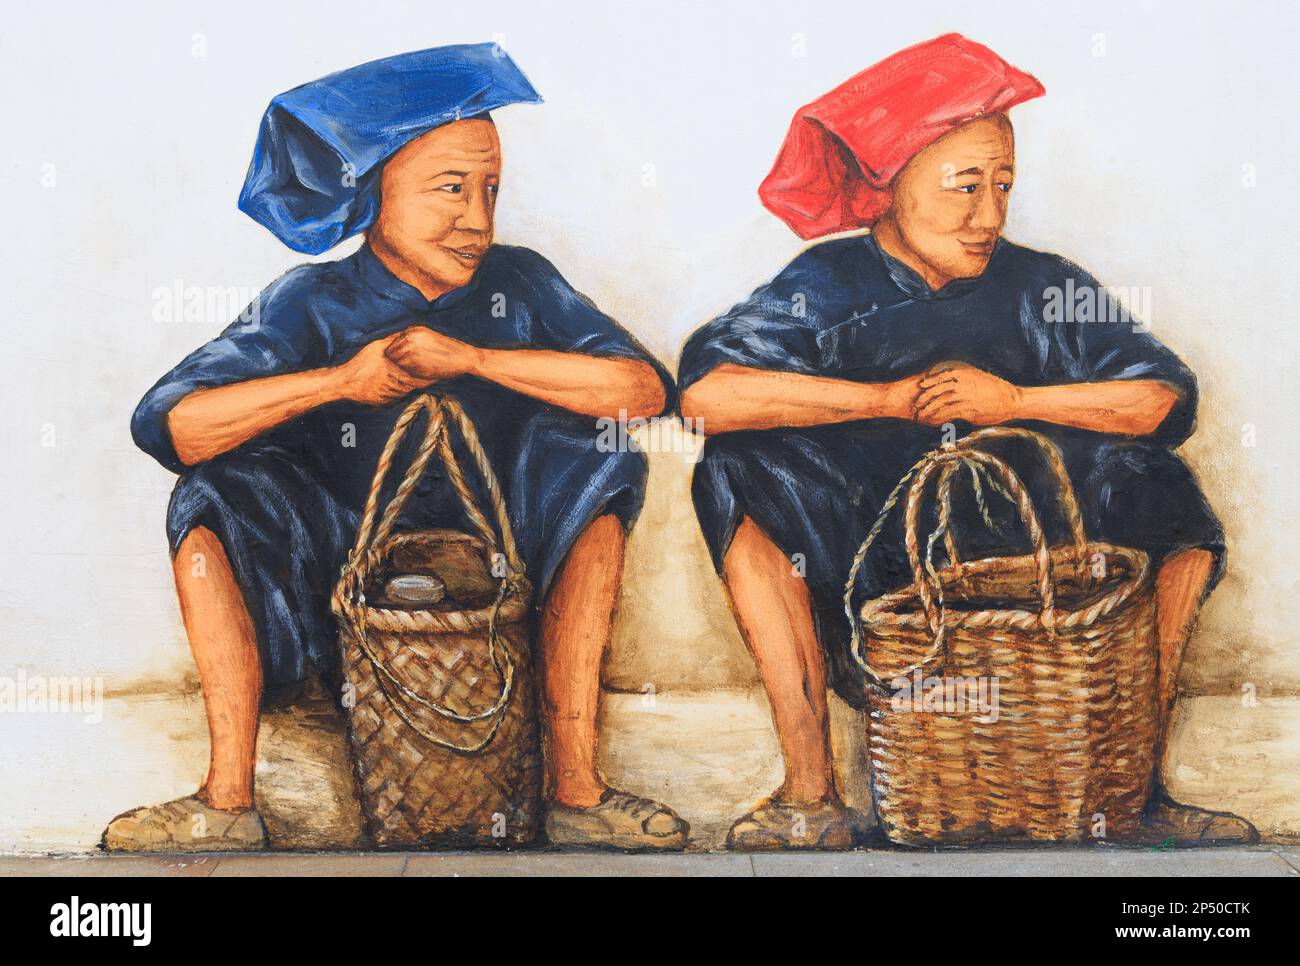 Mural by Yip Yew Chong of 2 Samsui women, or women labourers in their classic hats. Mohamed Ali Lane, Chinatown, Singapore Stock Photo